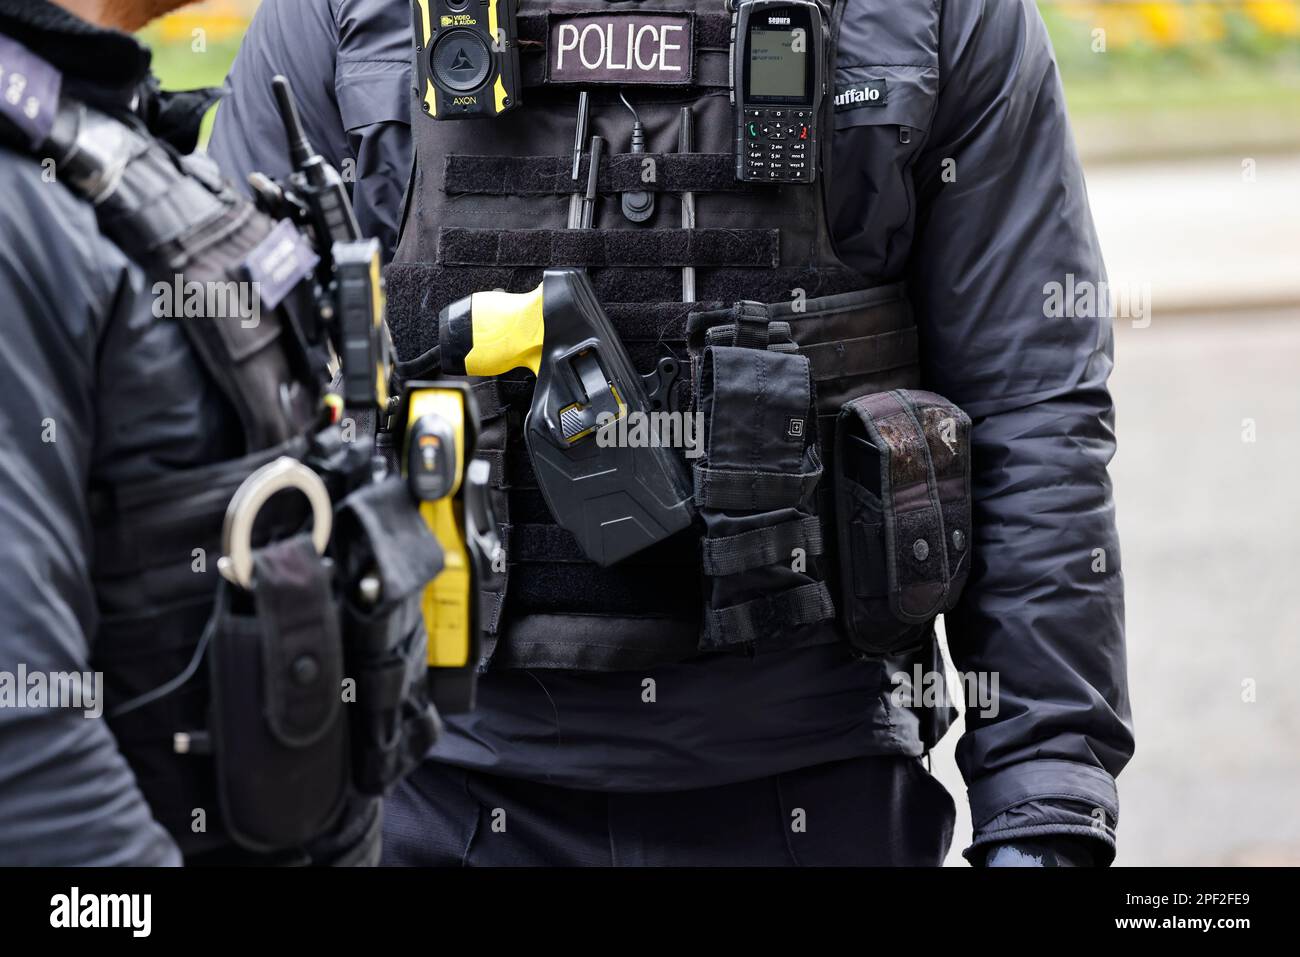 England, London, Westminster, Downing Street, Detail of AFO Police officers wearing body protection with radio, taser gun and handcuffs. Stock Photo